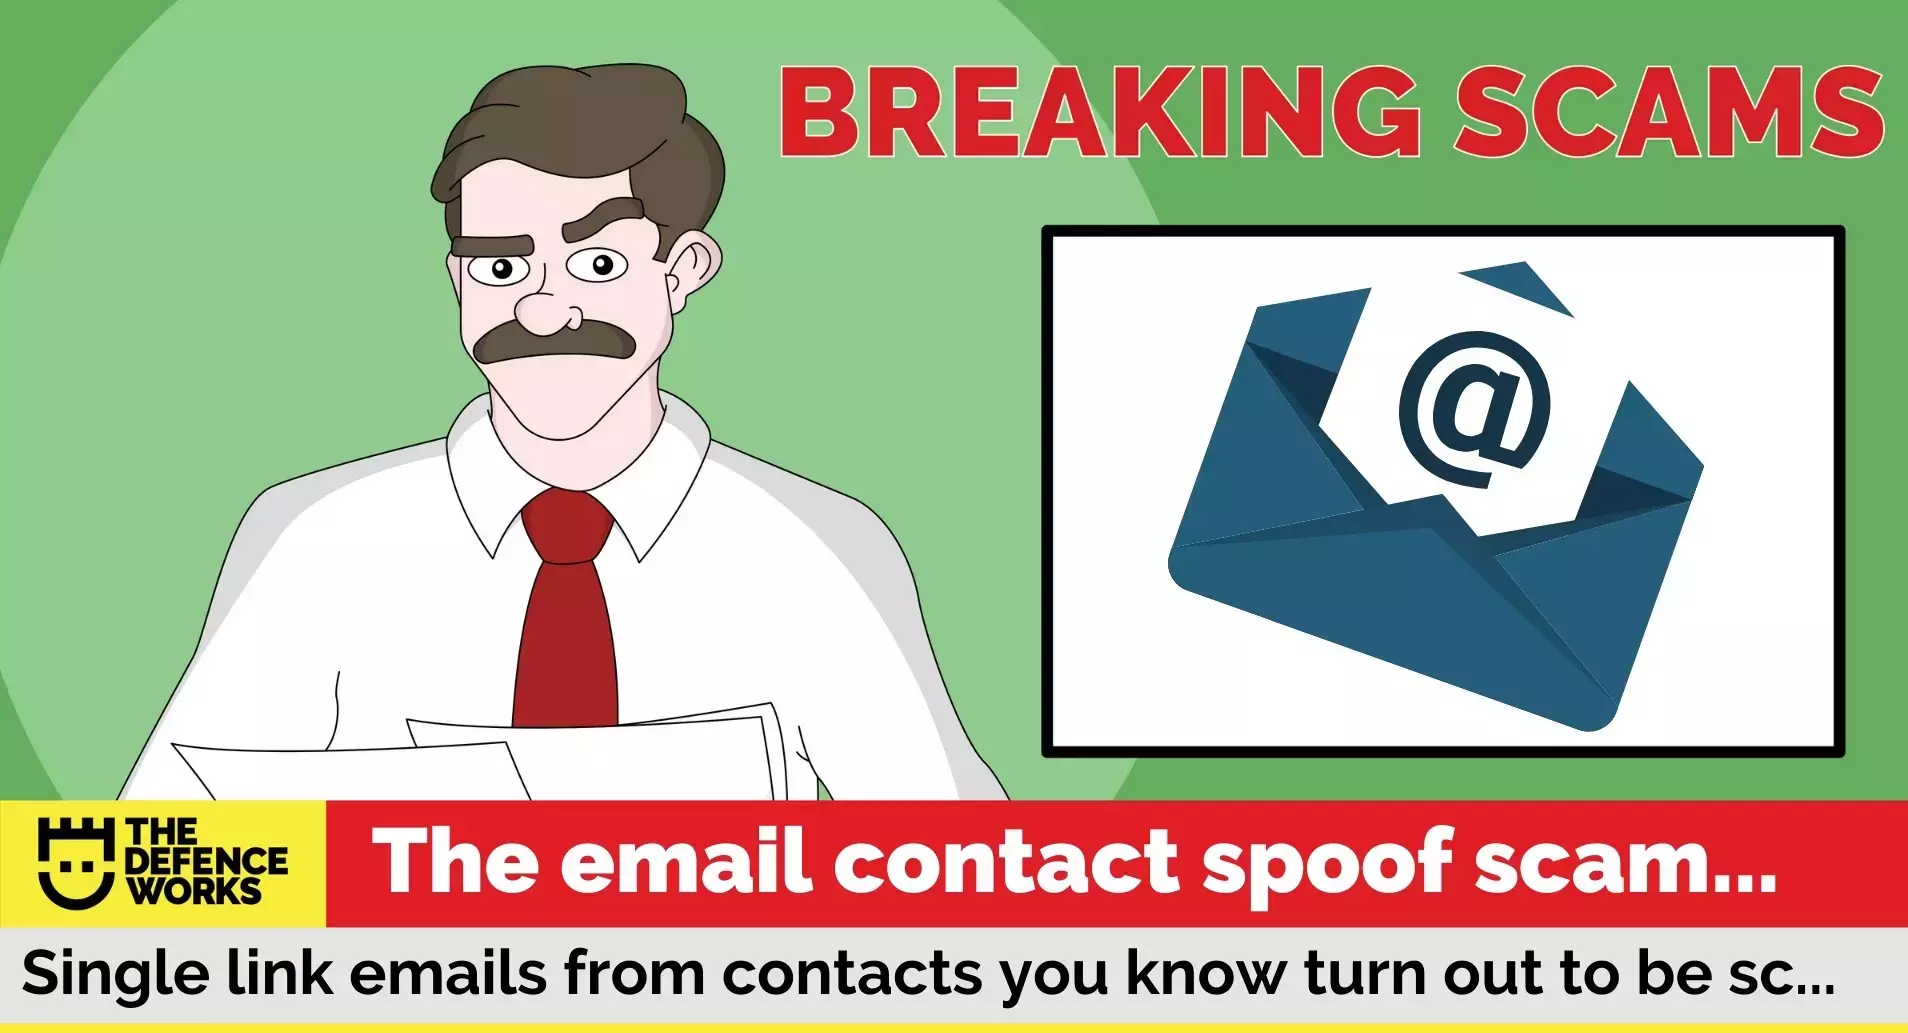 When is a Spoof not a Spoof? The Email Contact Scam